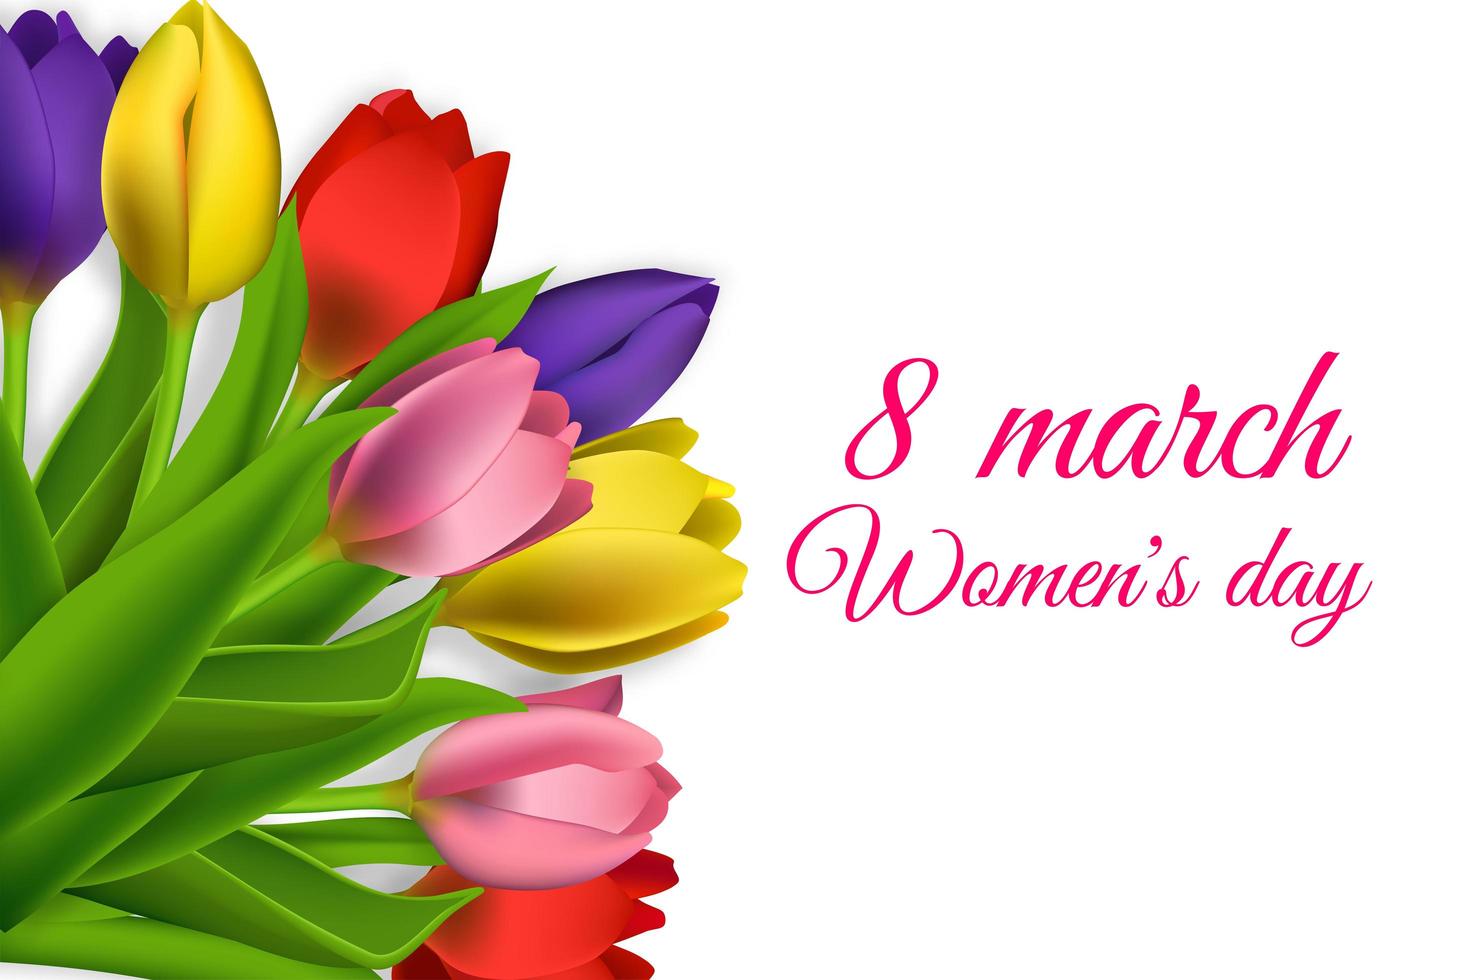 Realistic tulips 8 march Women's Day design vector